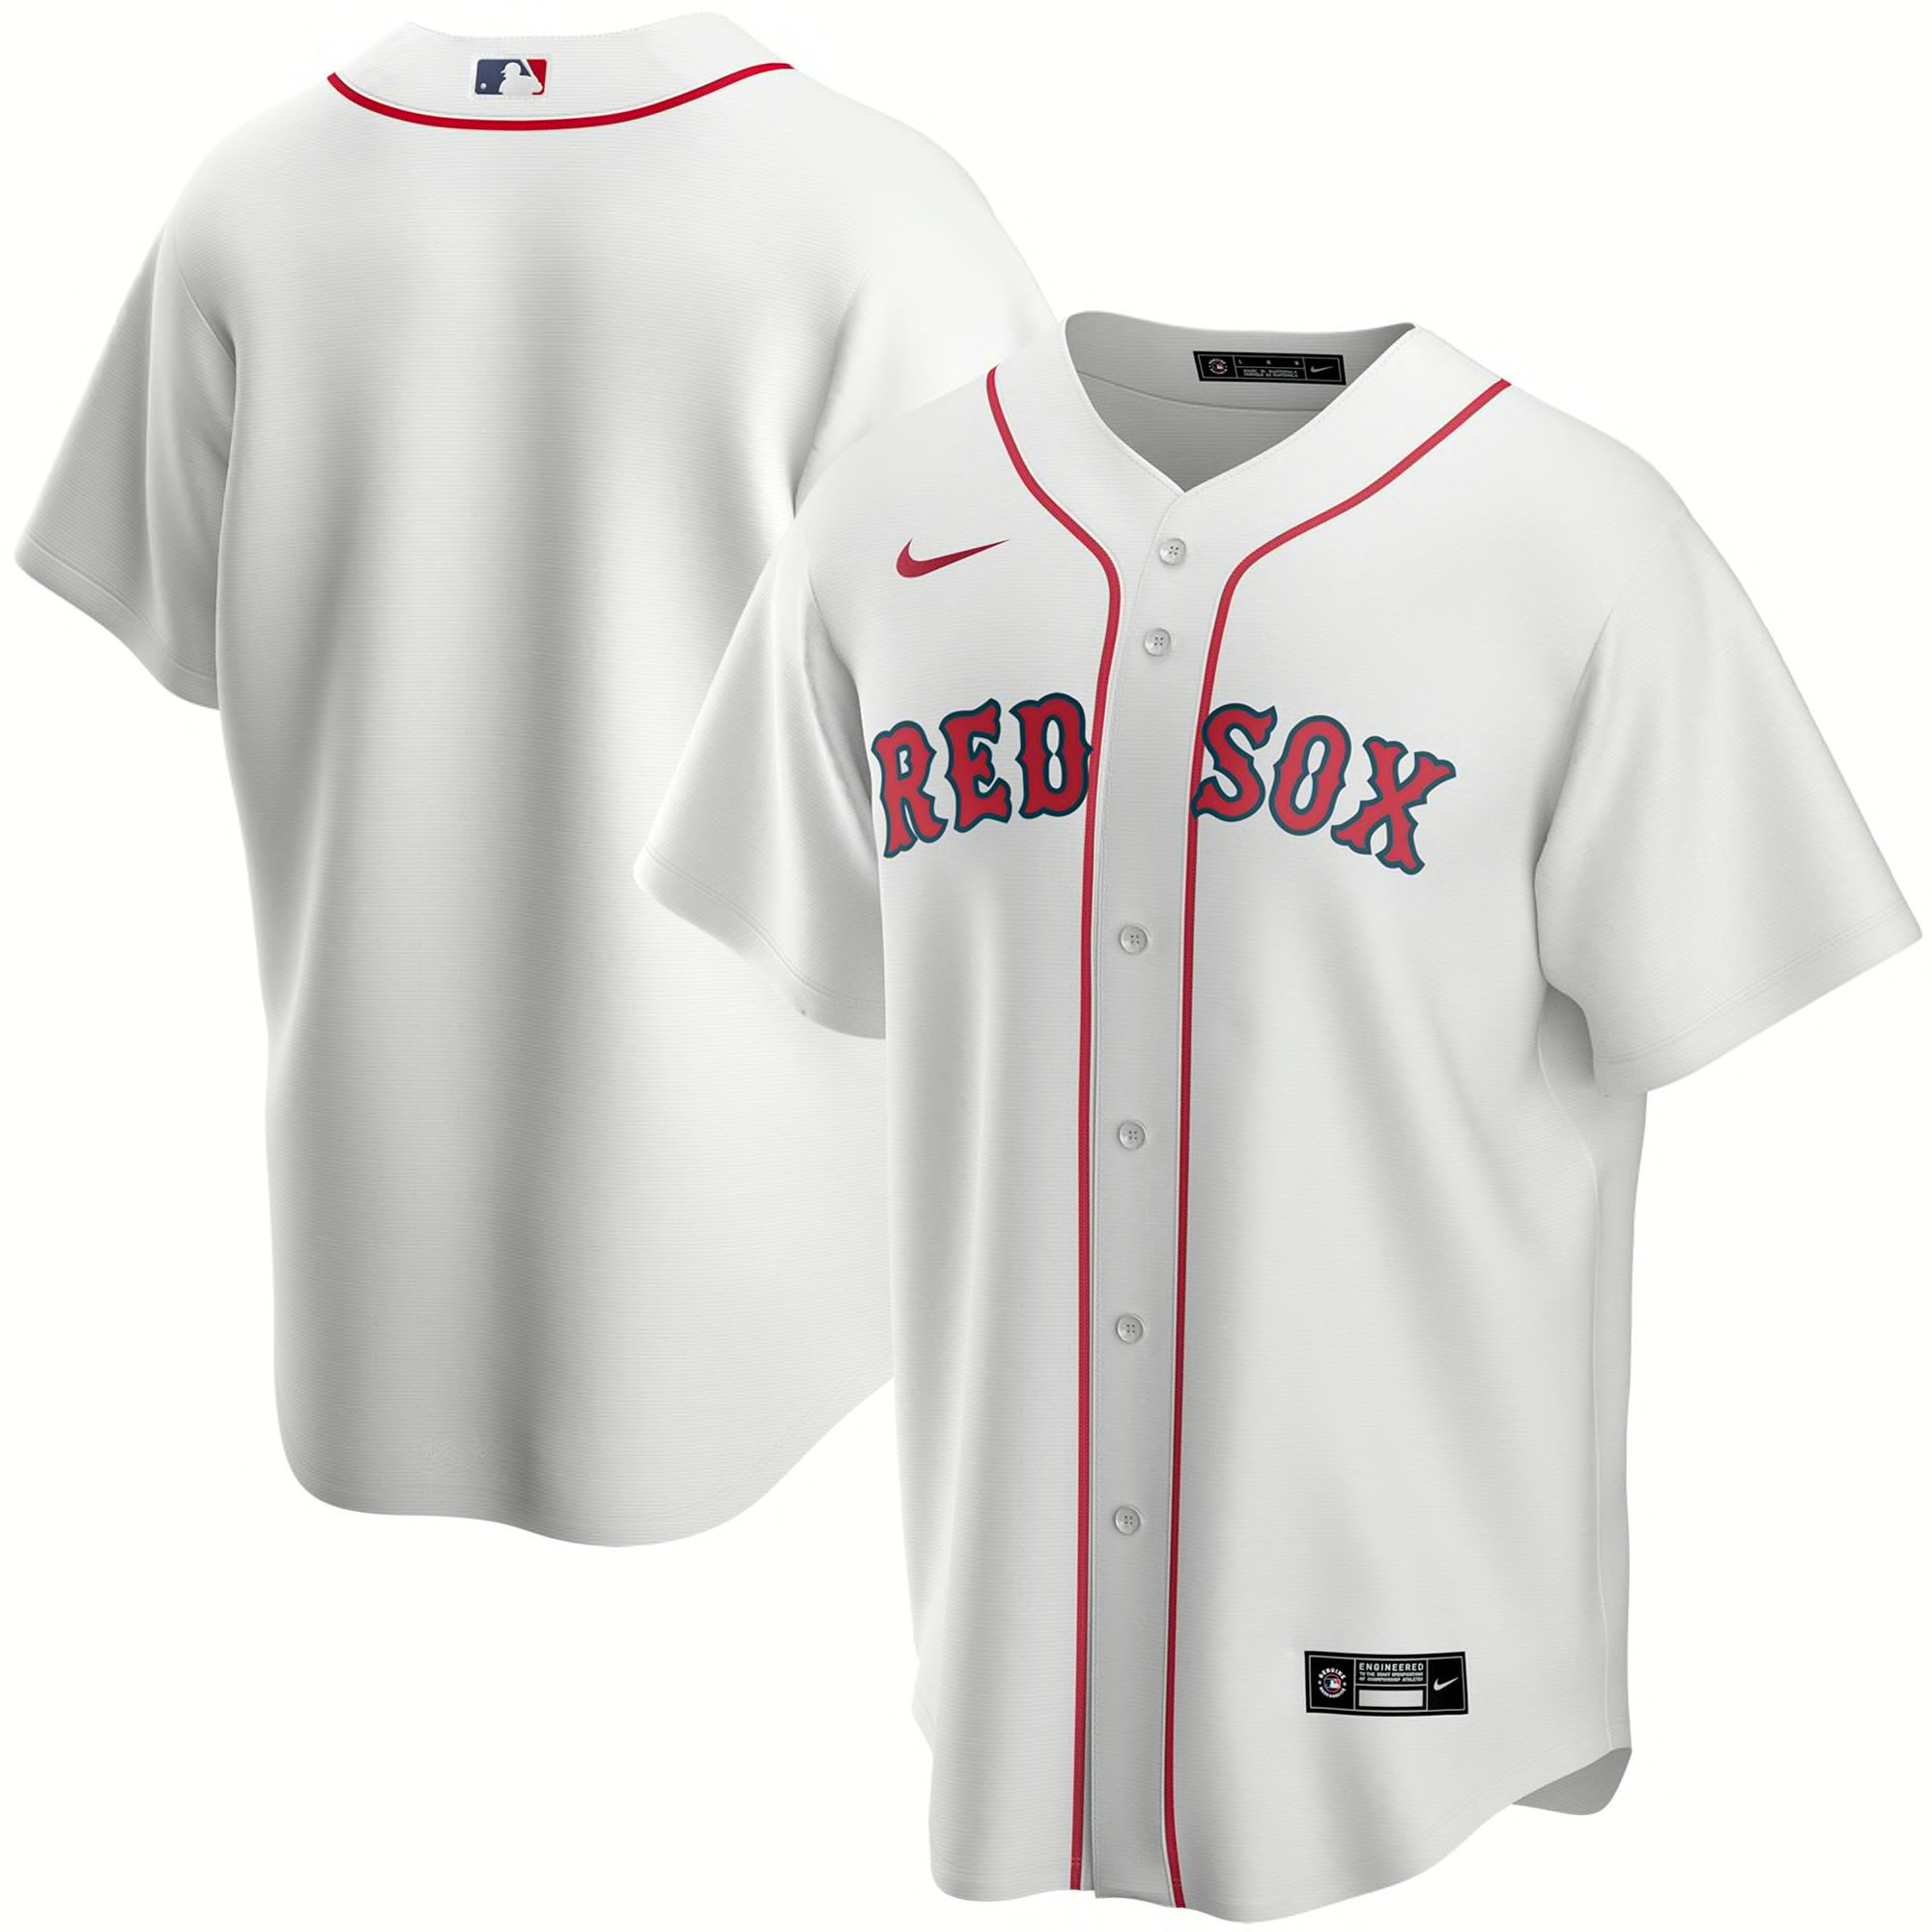 fathers day red sox jersey